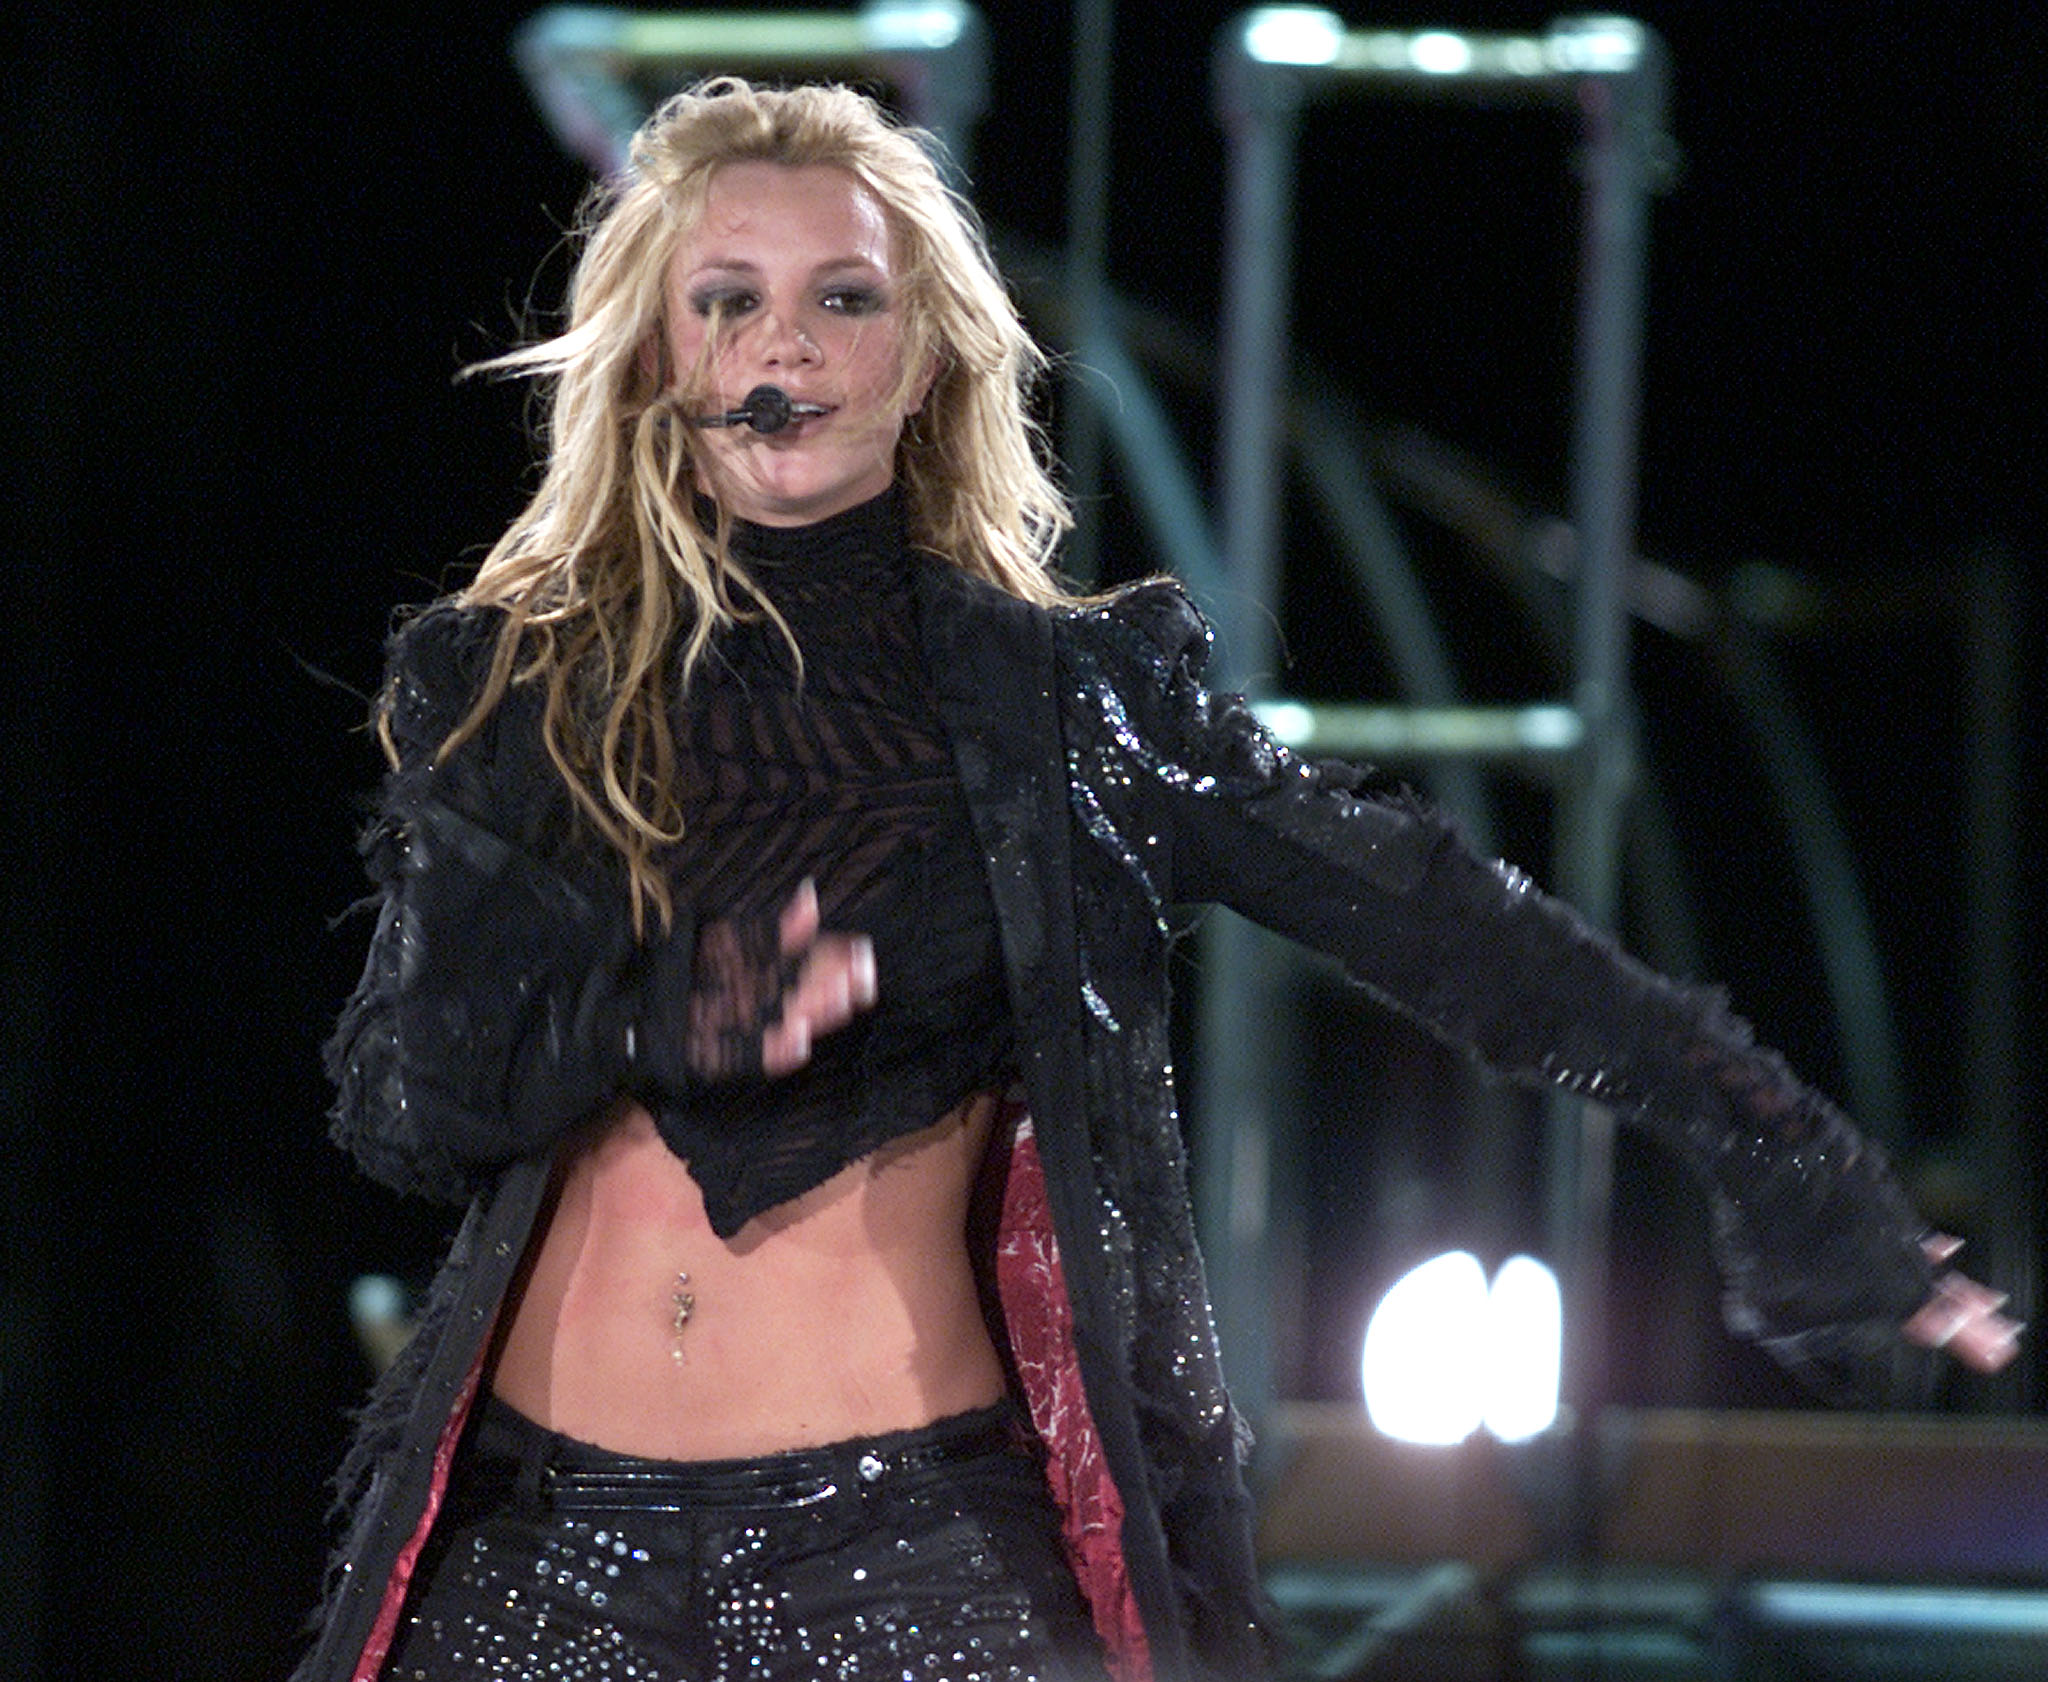 U.S. pop singer Britney Spears perfoms at the Foro Sol in Mexico City, July 27, 2002. REUTERS/Henry Romero HR/ME